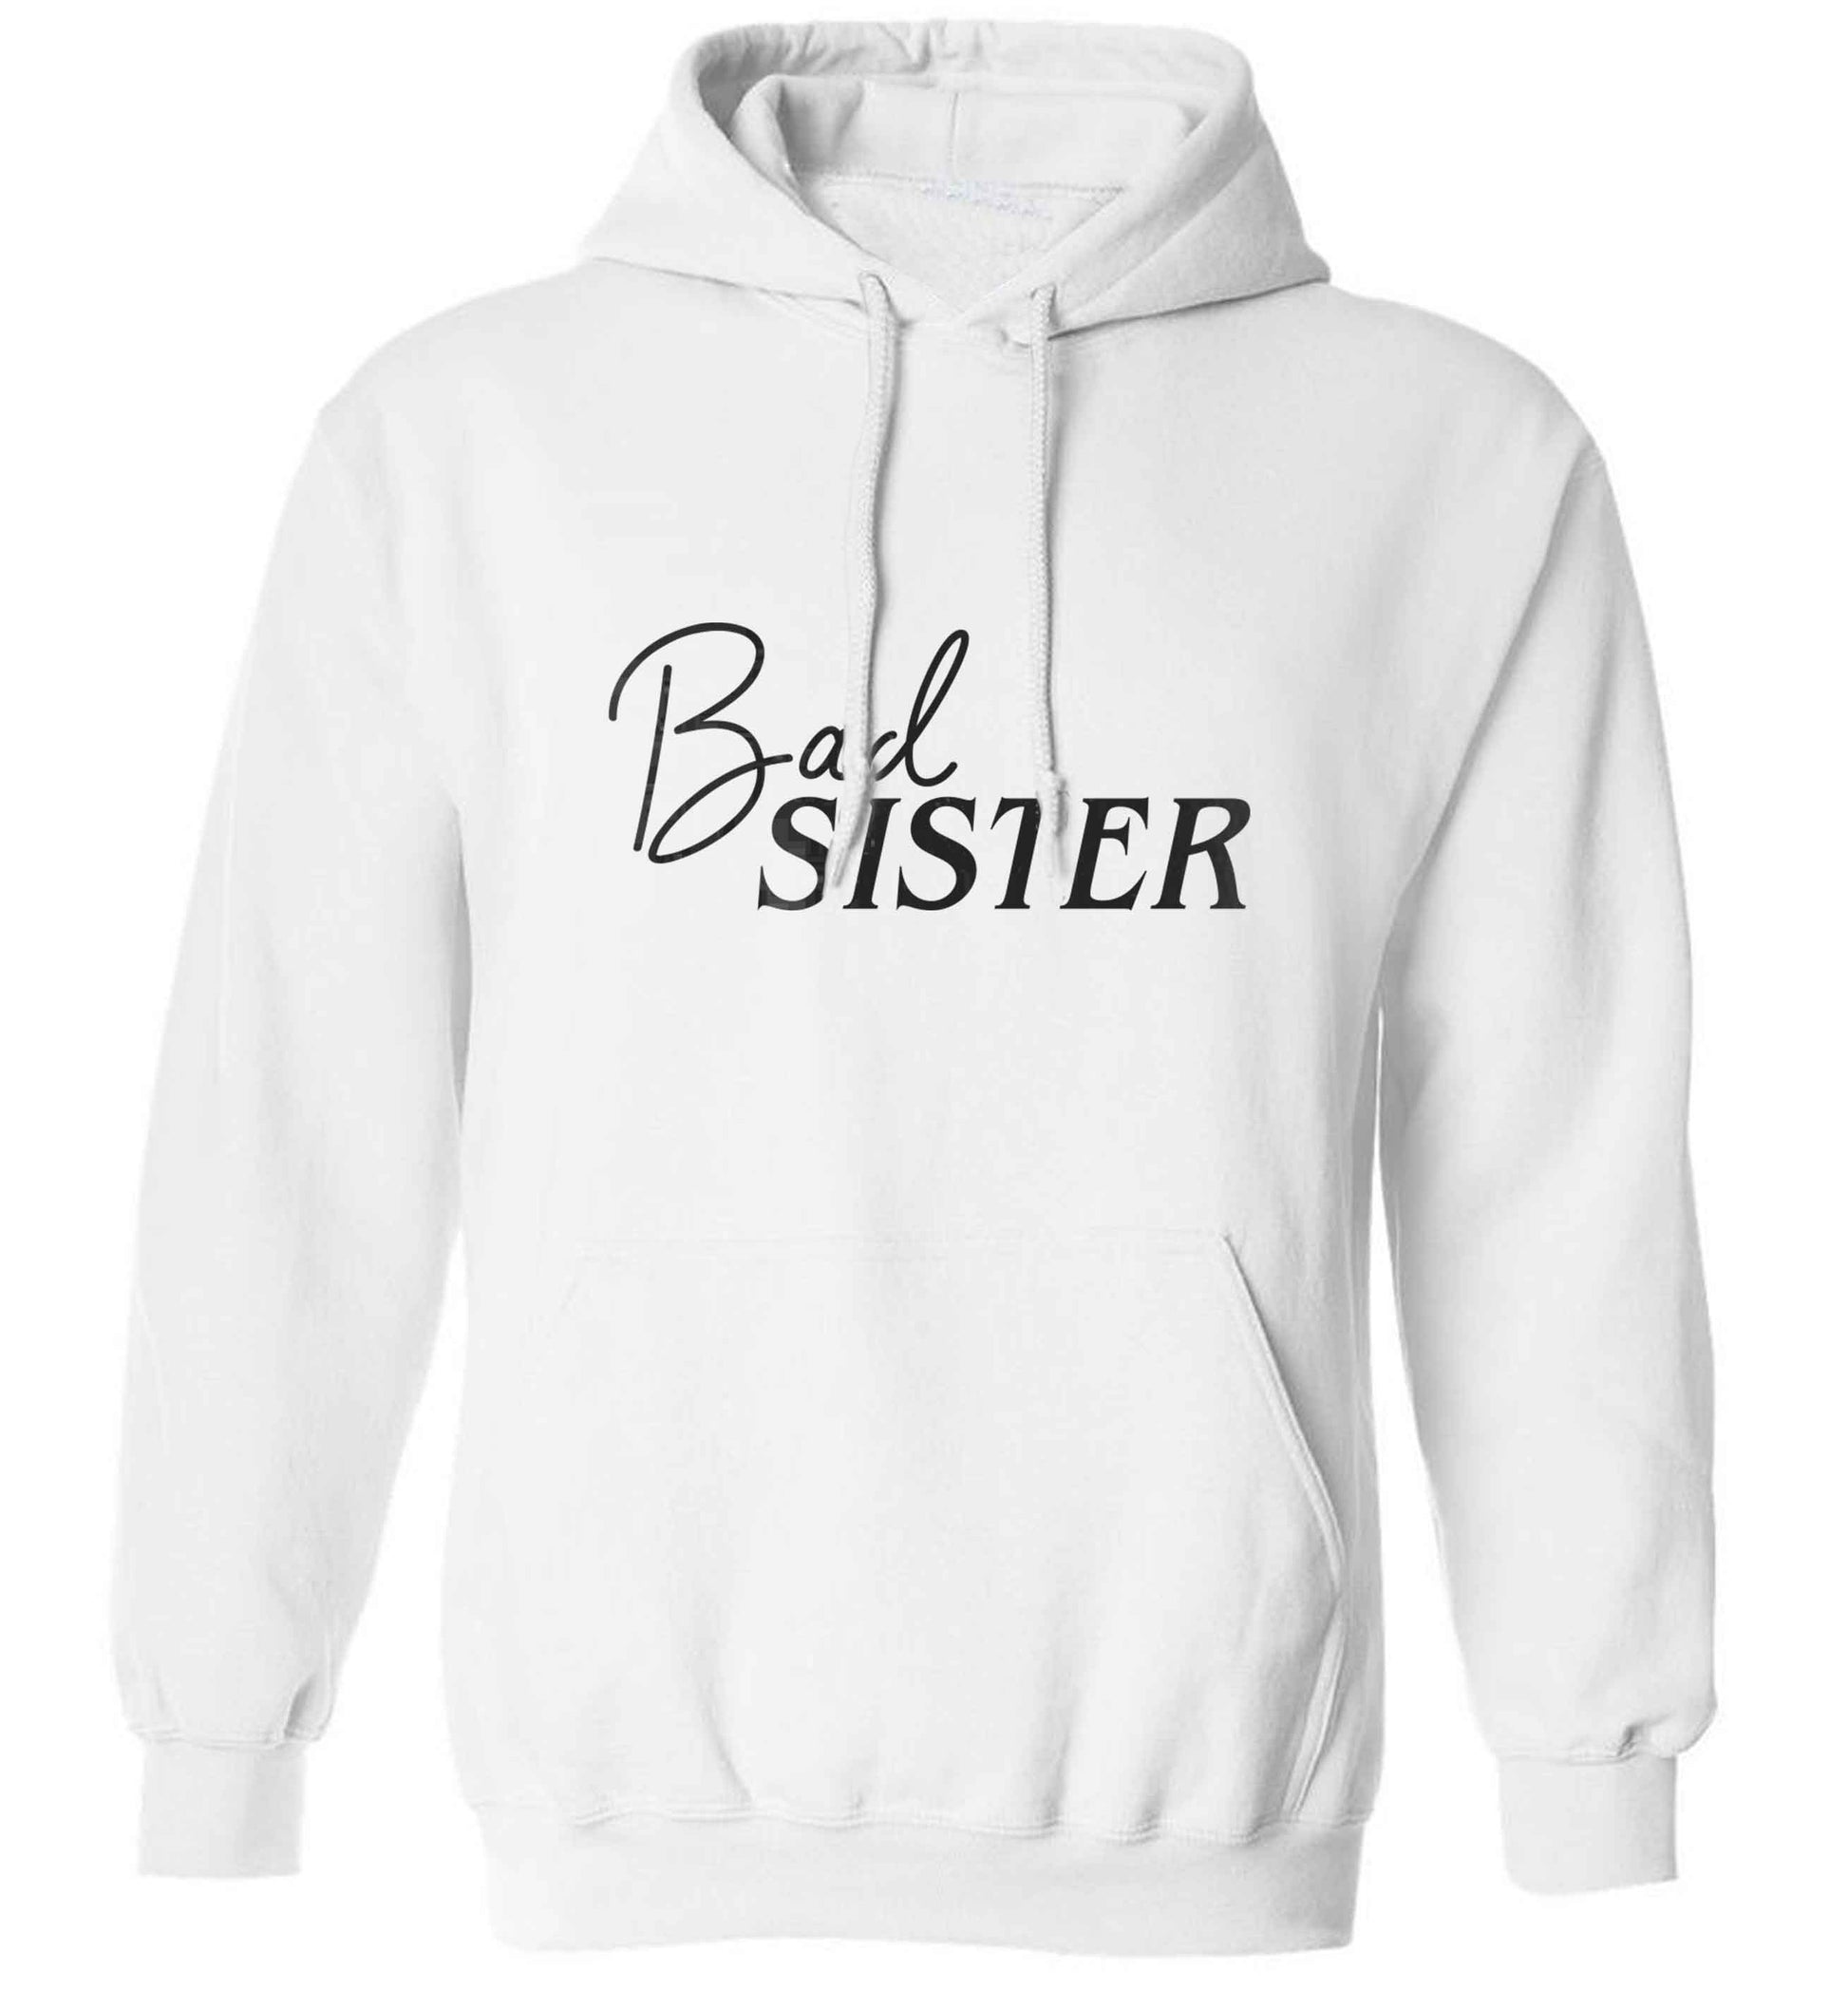 Bad sister adults unisex white hoodie 2XL